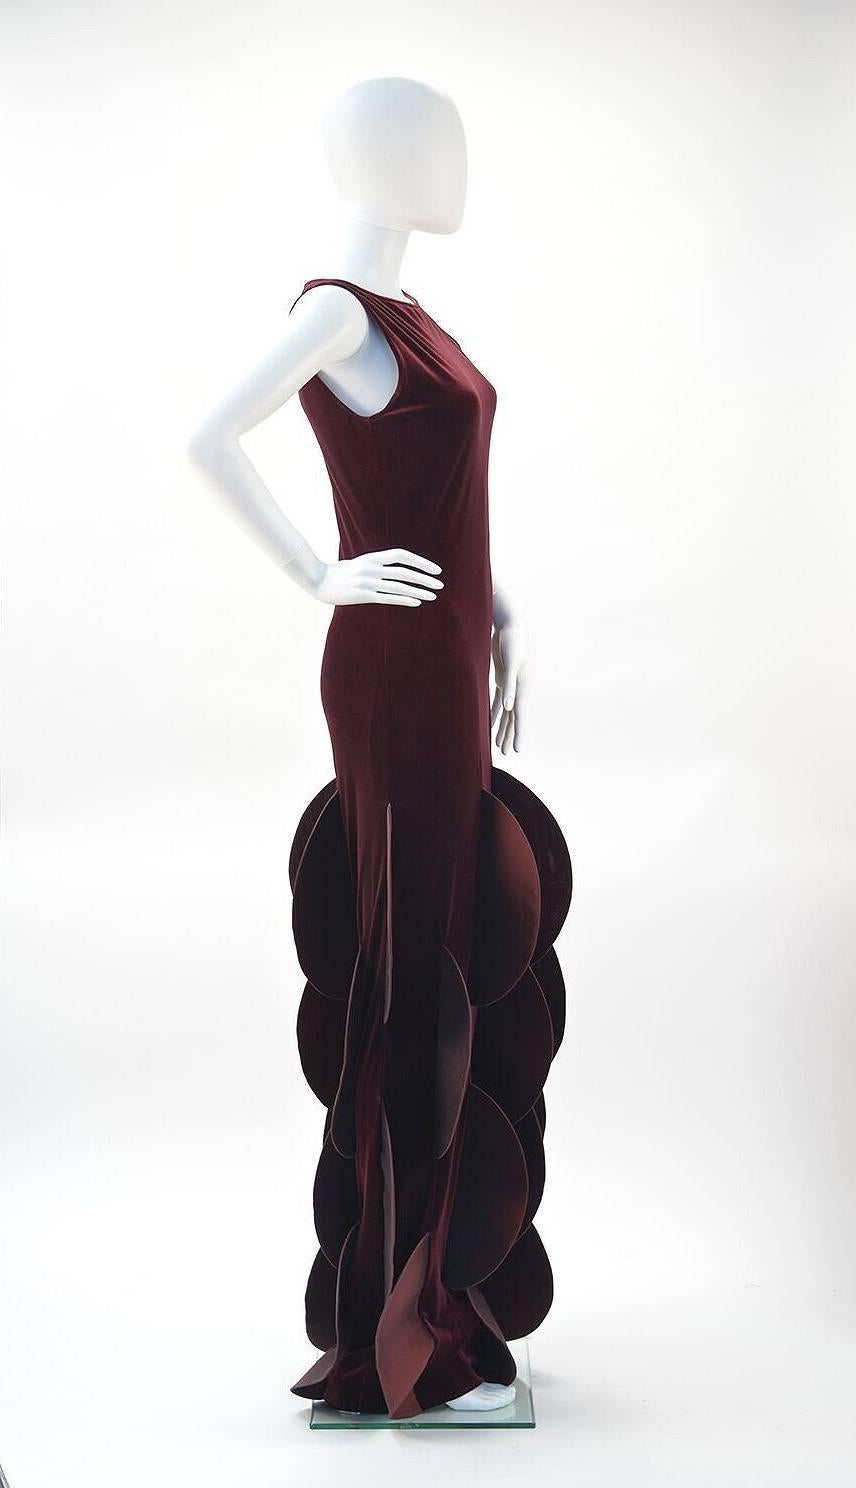 This "Evolution de Pierre Cardin" dress was created after the fall of the Berlin wall and Cardin employed experts from formerly communist countries to produce his garments... as part of his own evolution and the world's, as